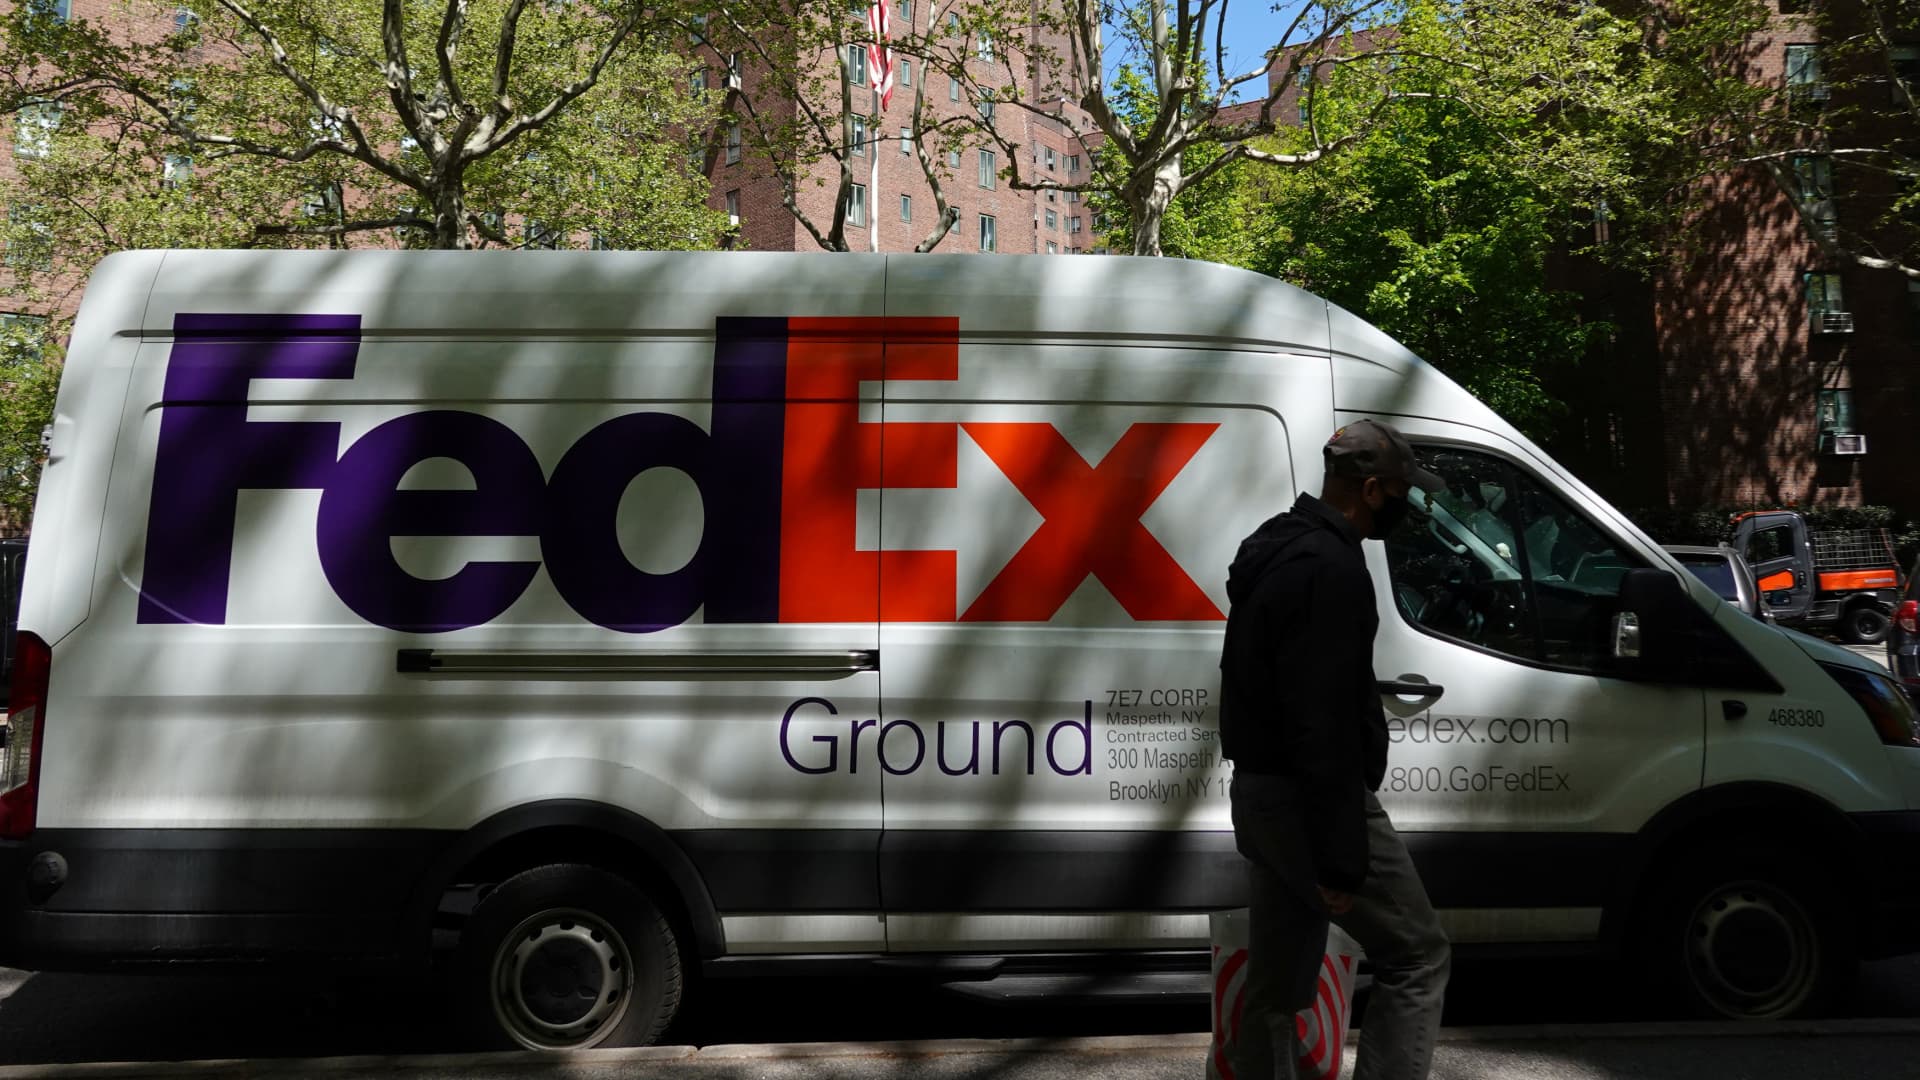 FedEx hikes package rates, details cost cutting as demand weakens globally - CNBC